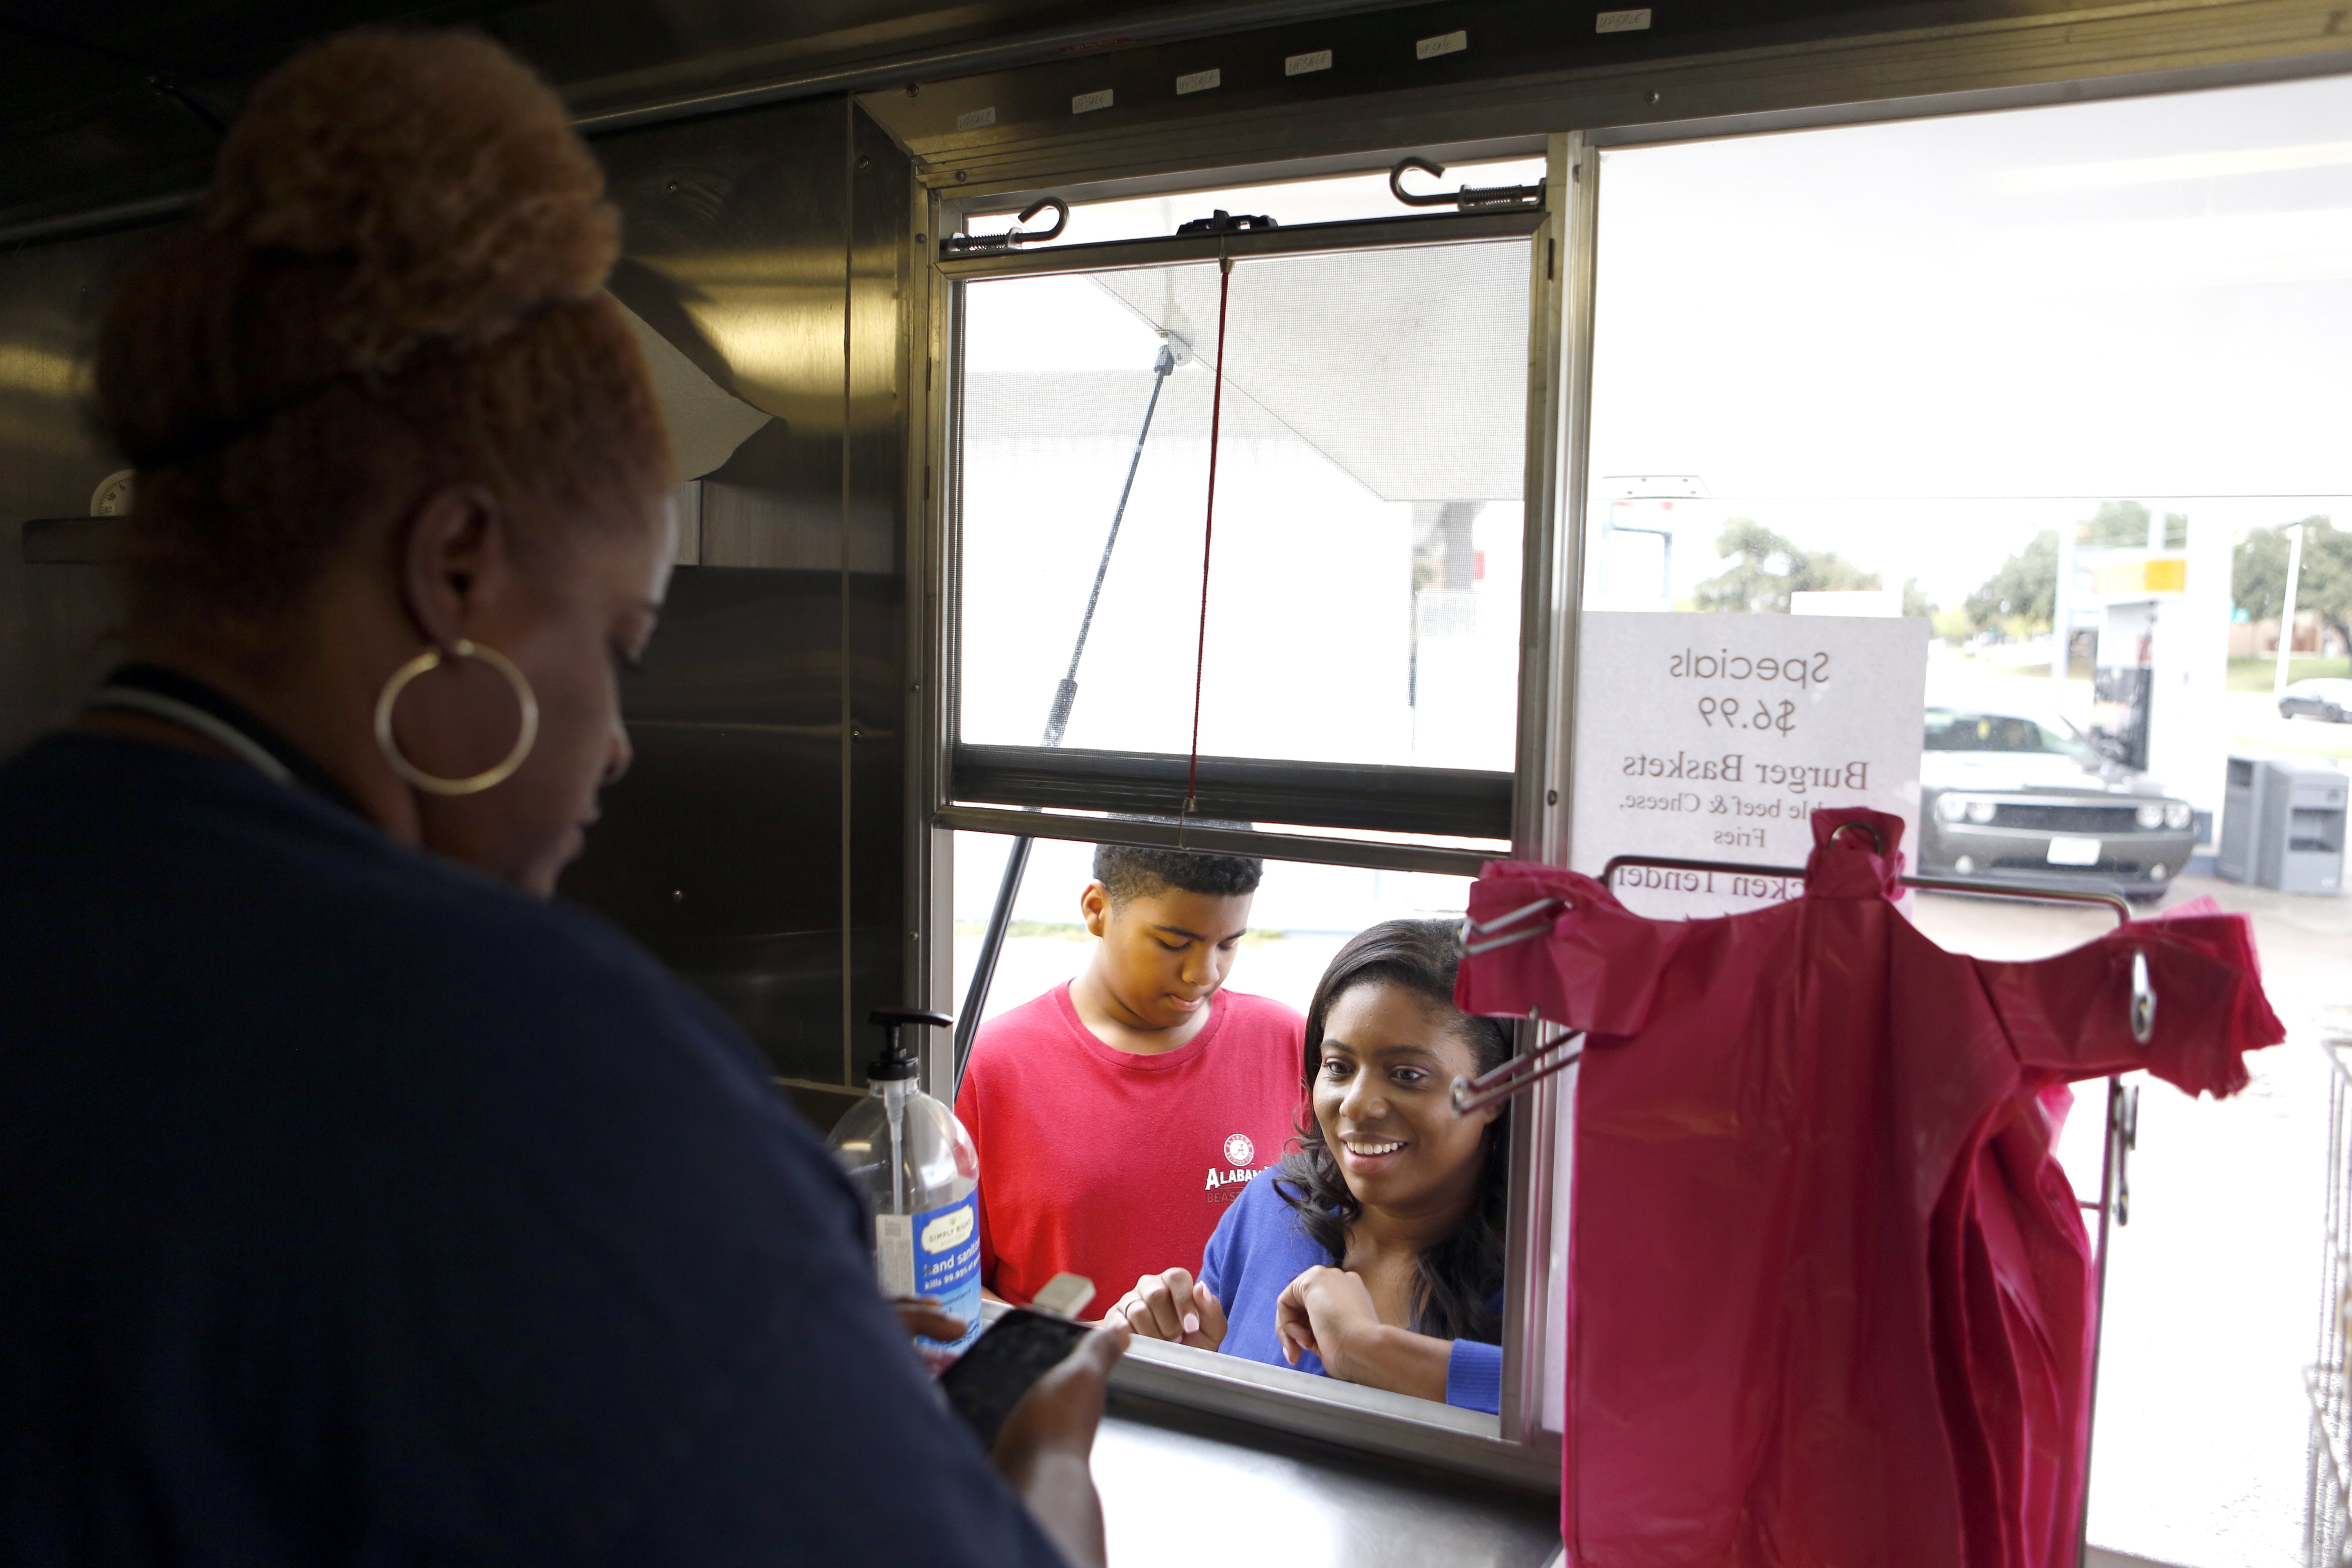 Customers Tara Hairston and son Tyler Kennedy, 14, place their orders at Quincy and Sheri Brown's food truck, Ain't No Mo! Butter Cakes, on their third day operating from a Shell gas station near 635 and Ferguson Rd in Garland, Texas. Photographed on Friday, November 6, 2015. Photo/Lara Solt